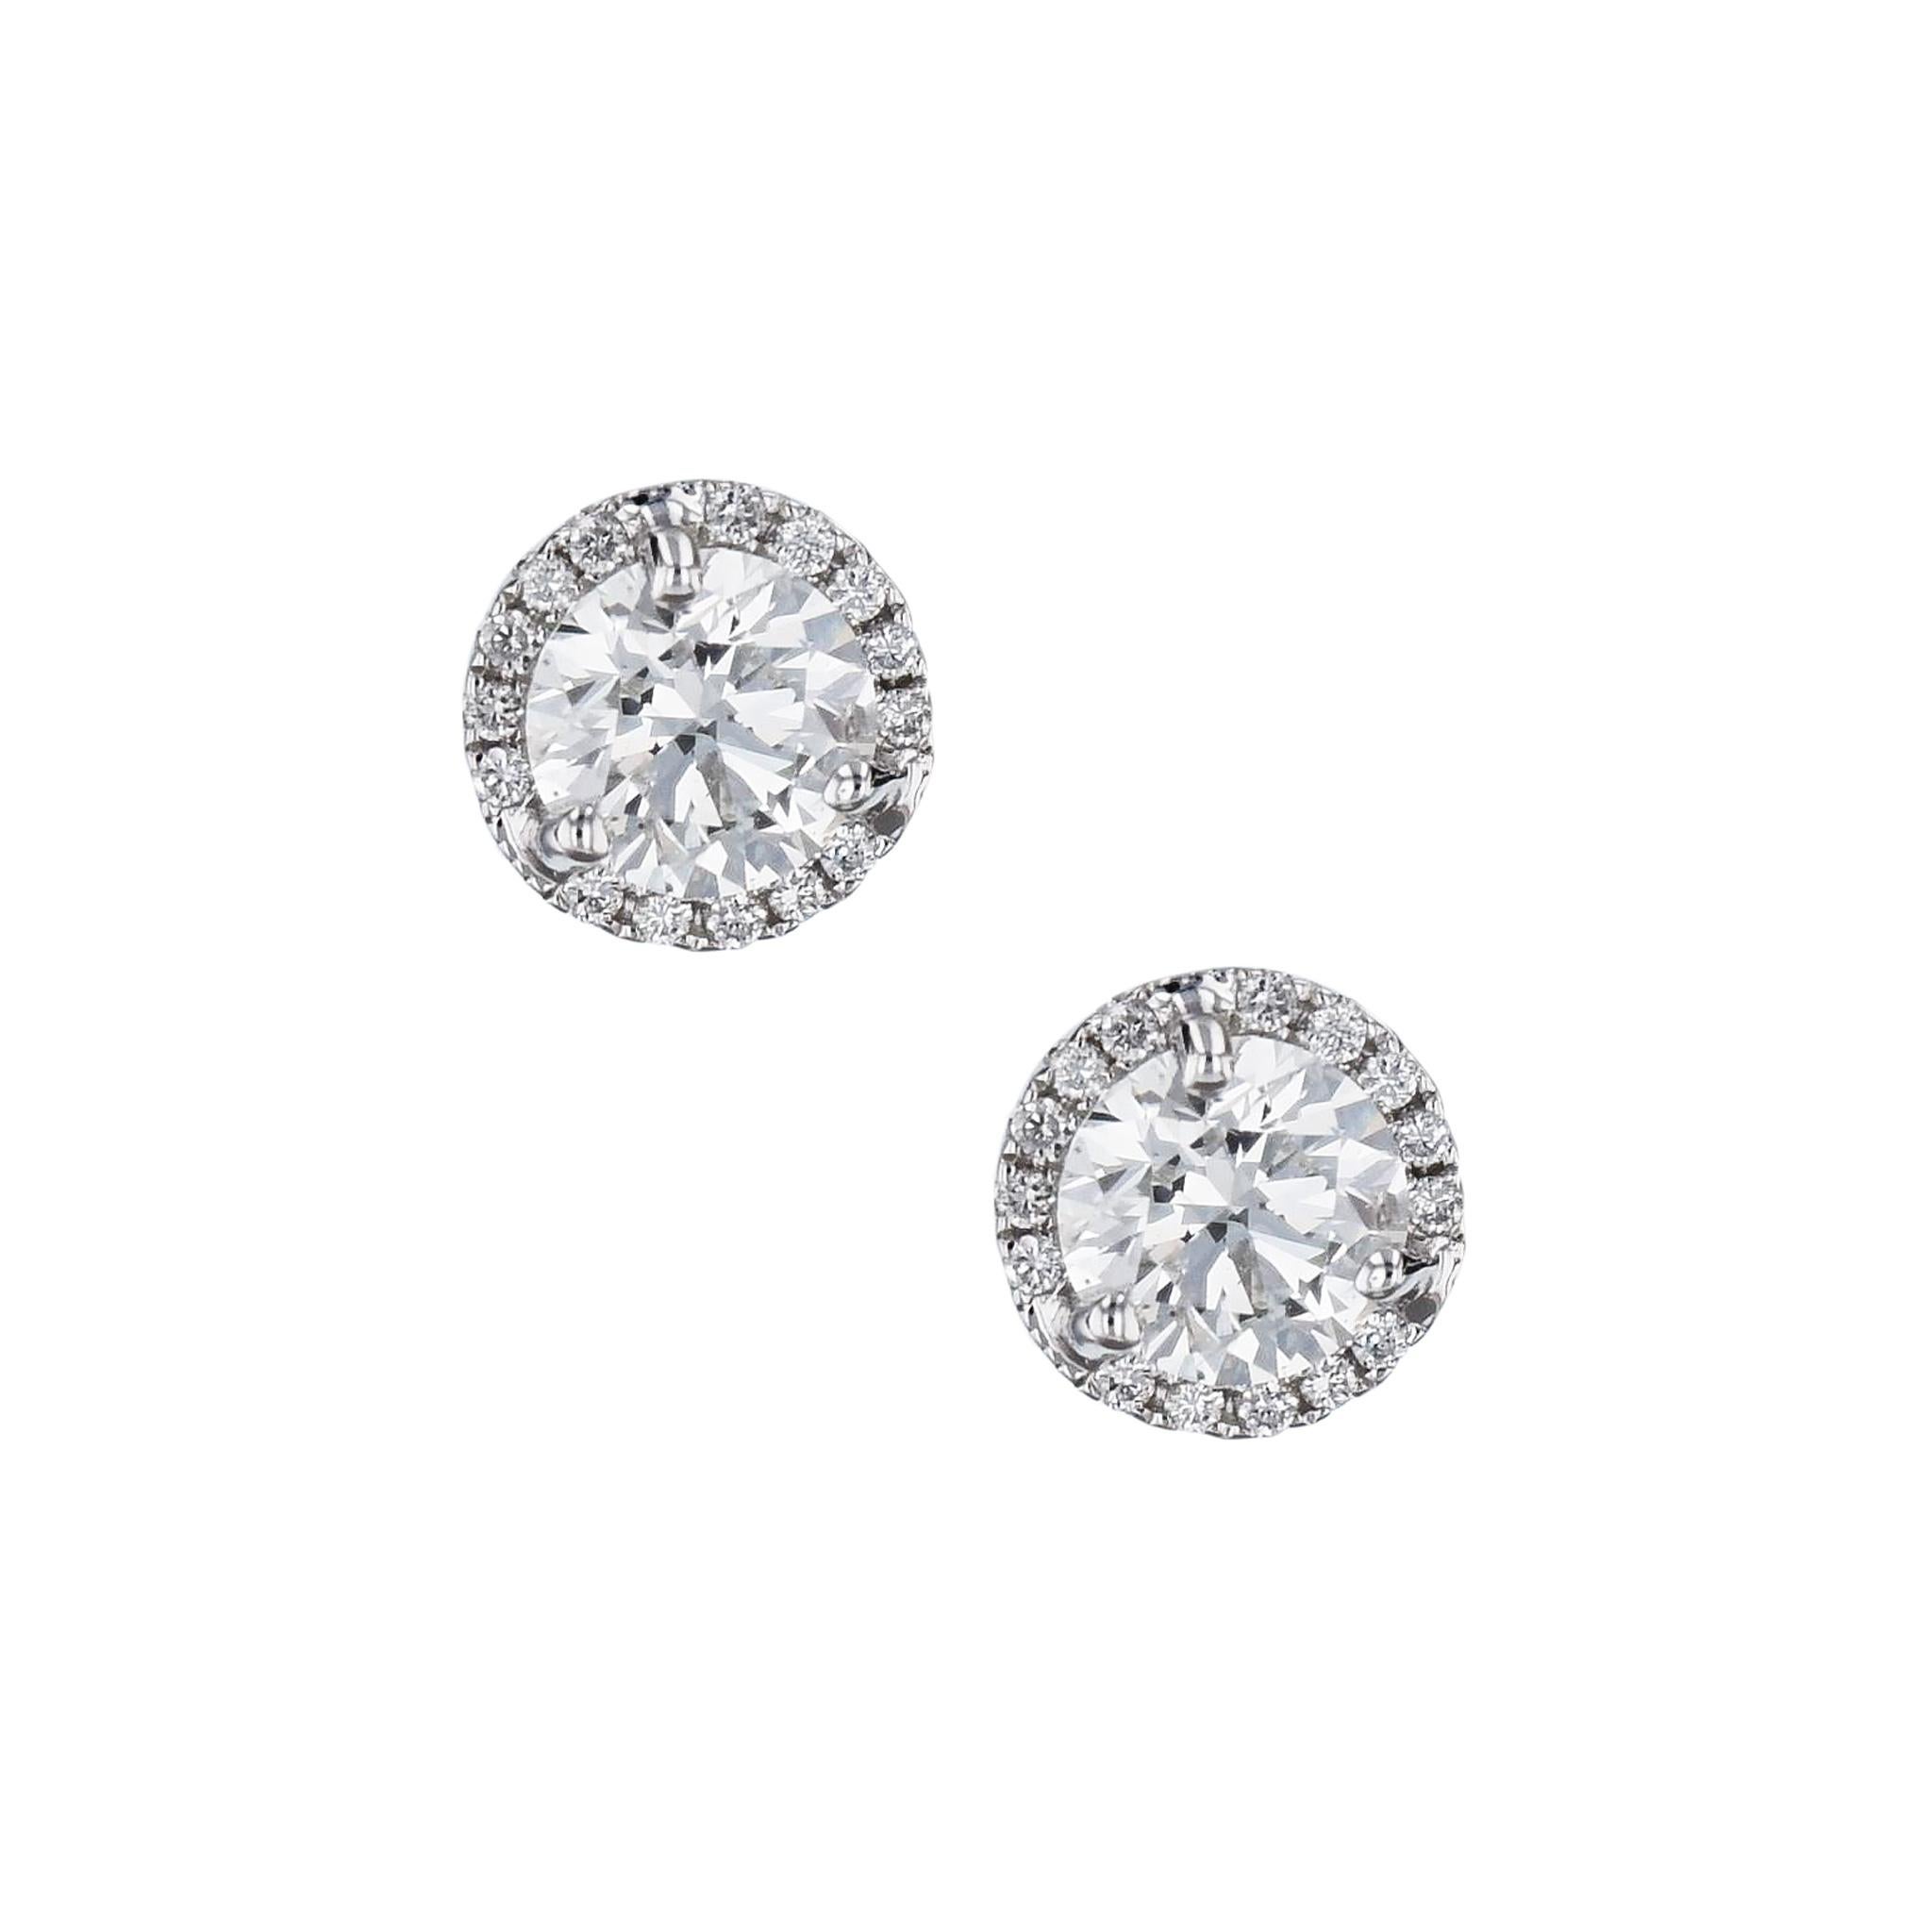 Modern Round Diamond and Pave Stud Earrings